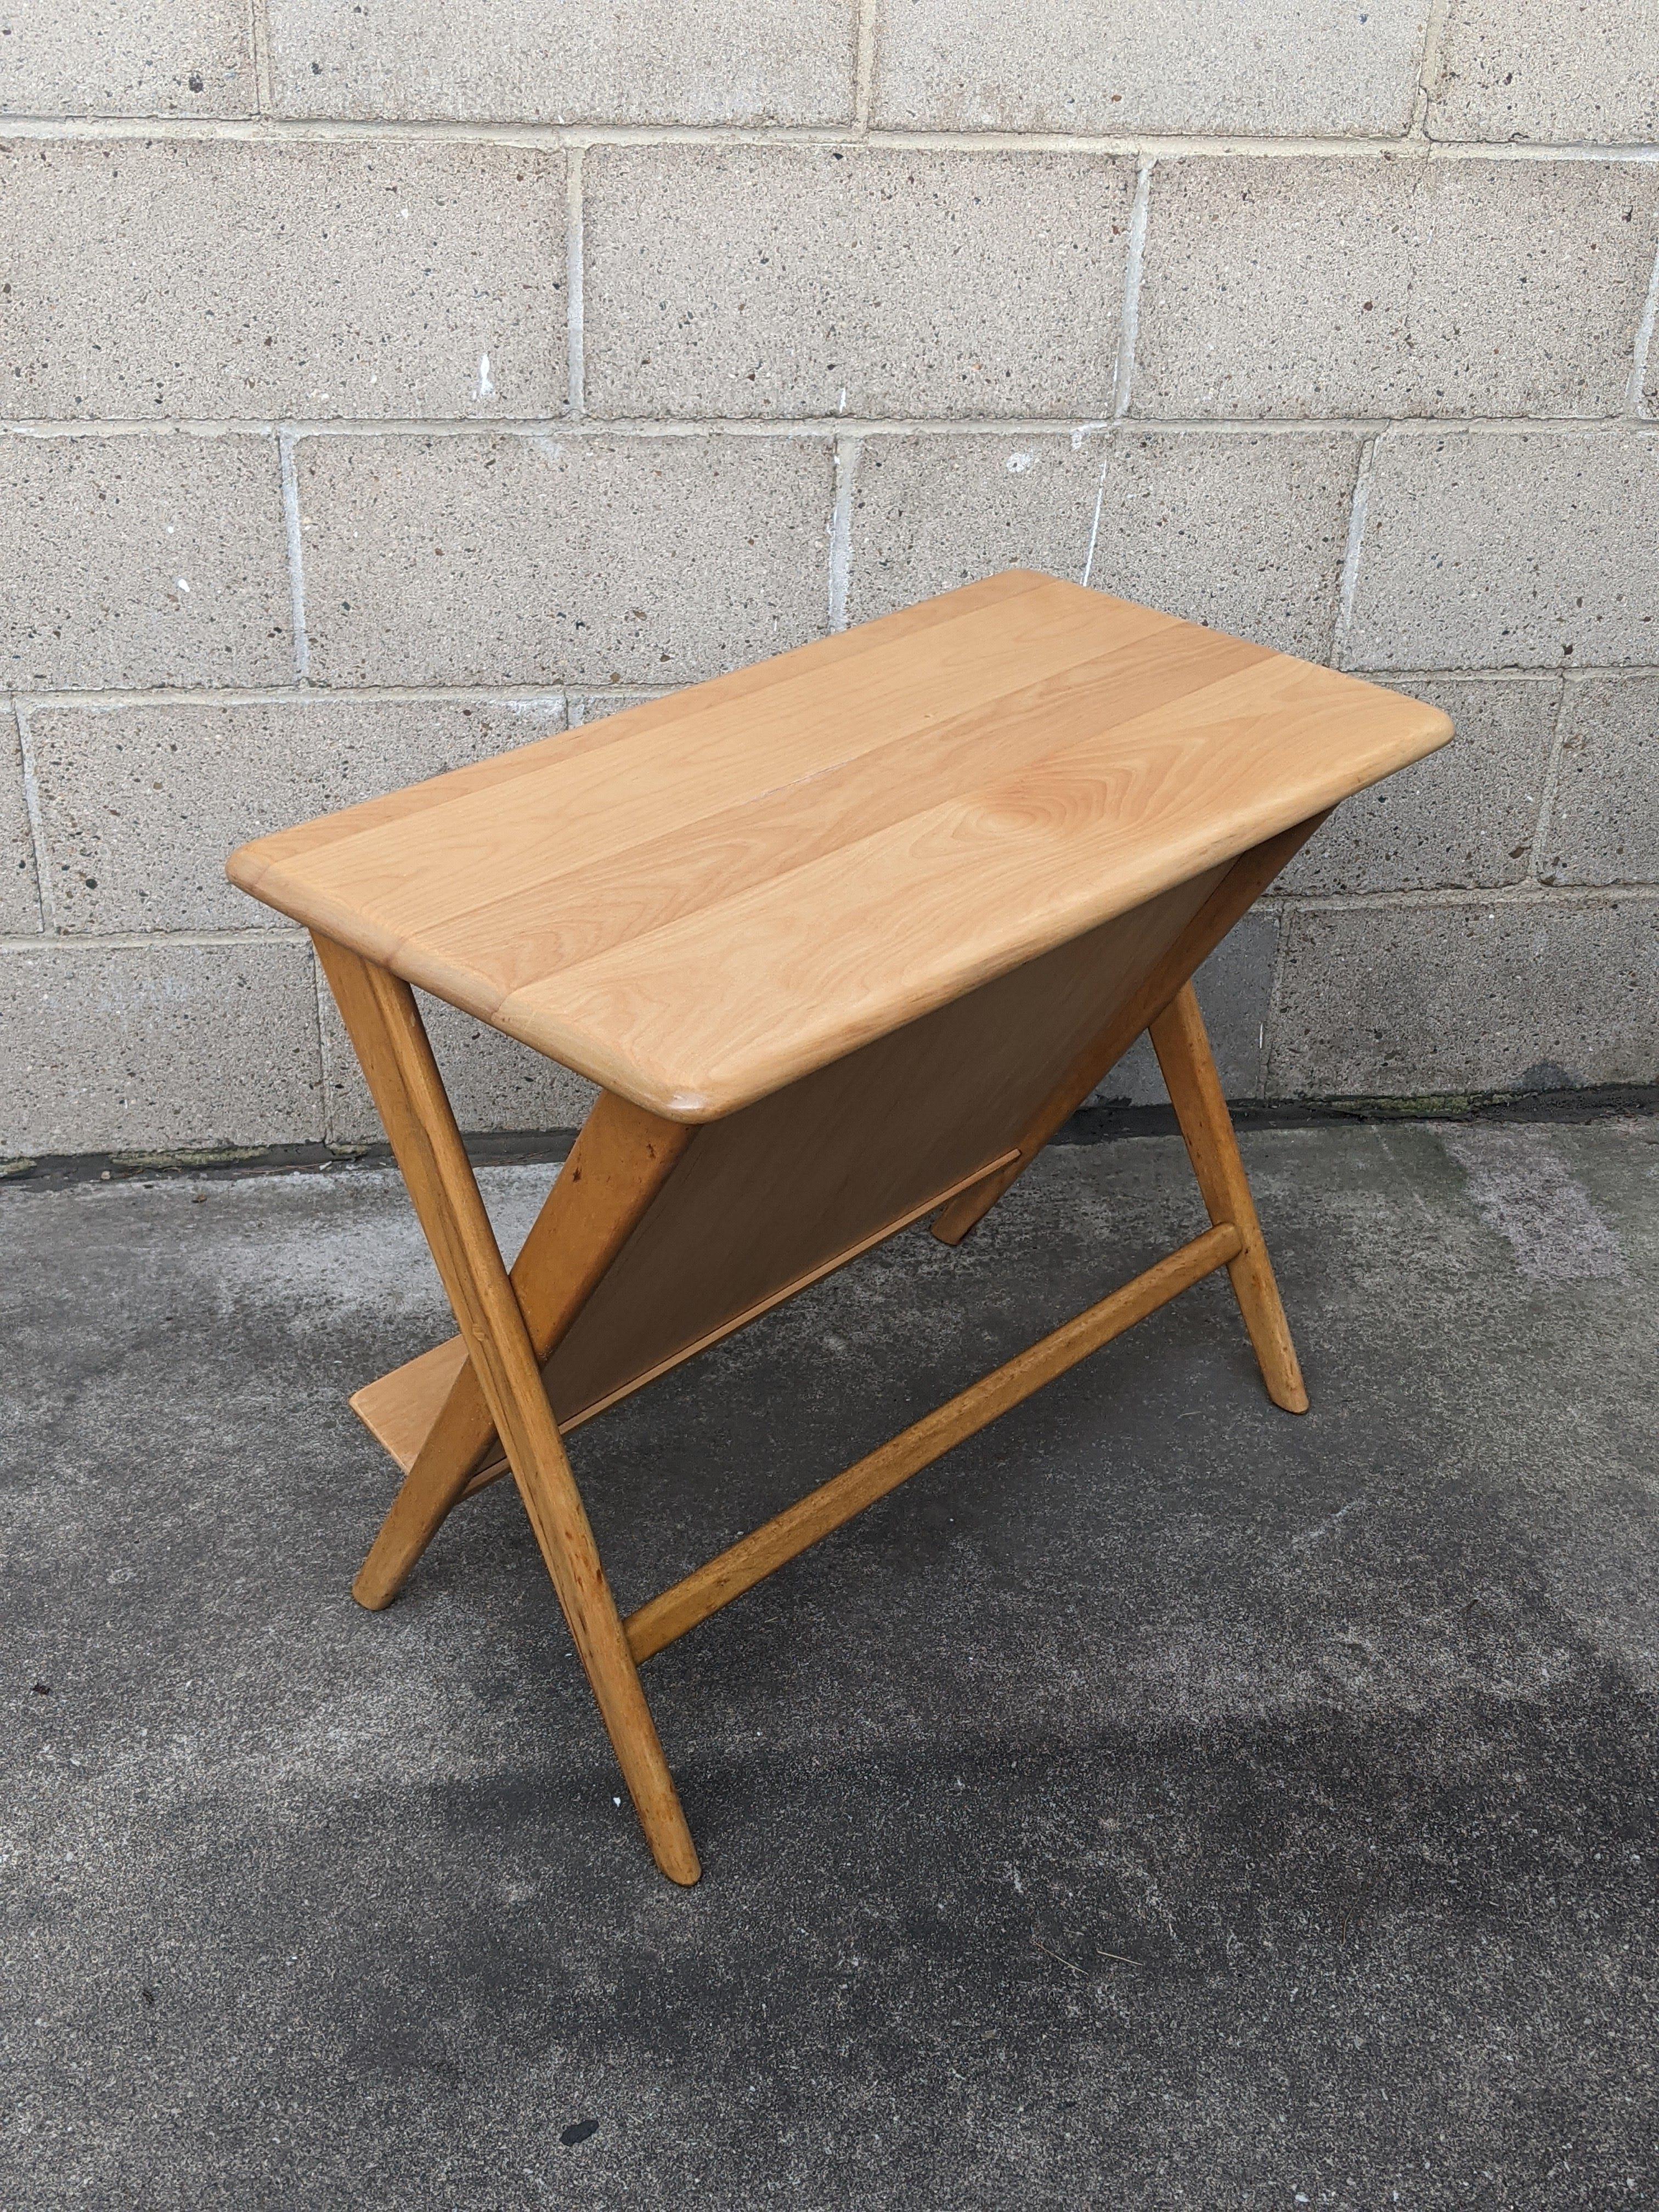 Mid-20th Century 1960s Heywood Wakefield M503 Magazine Table For Sale